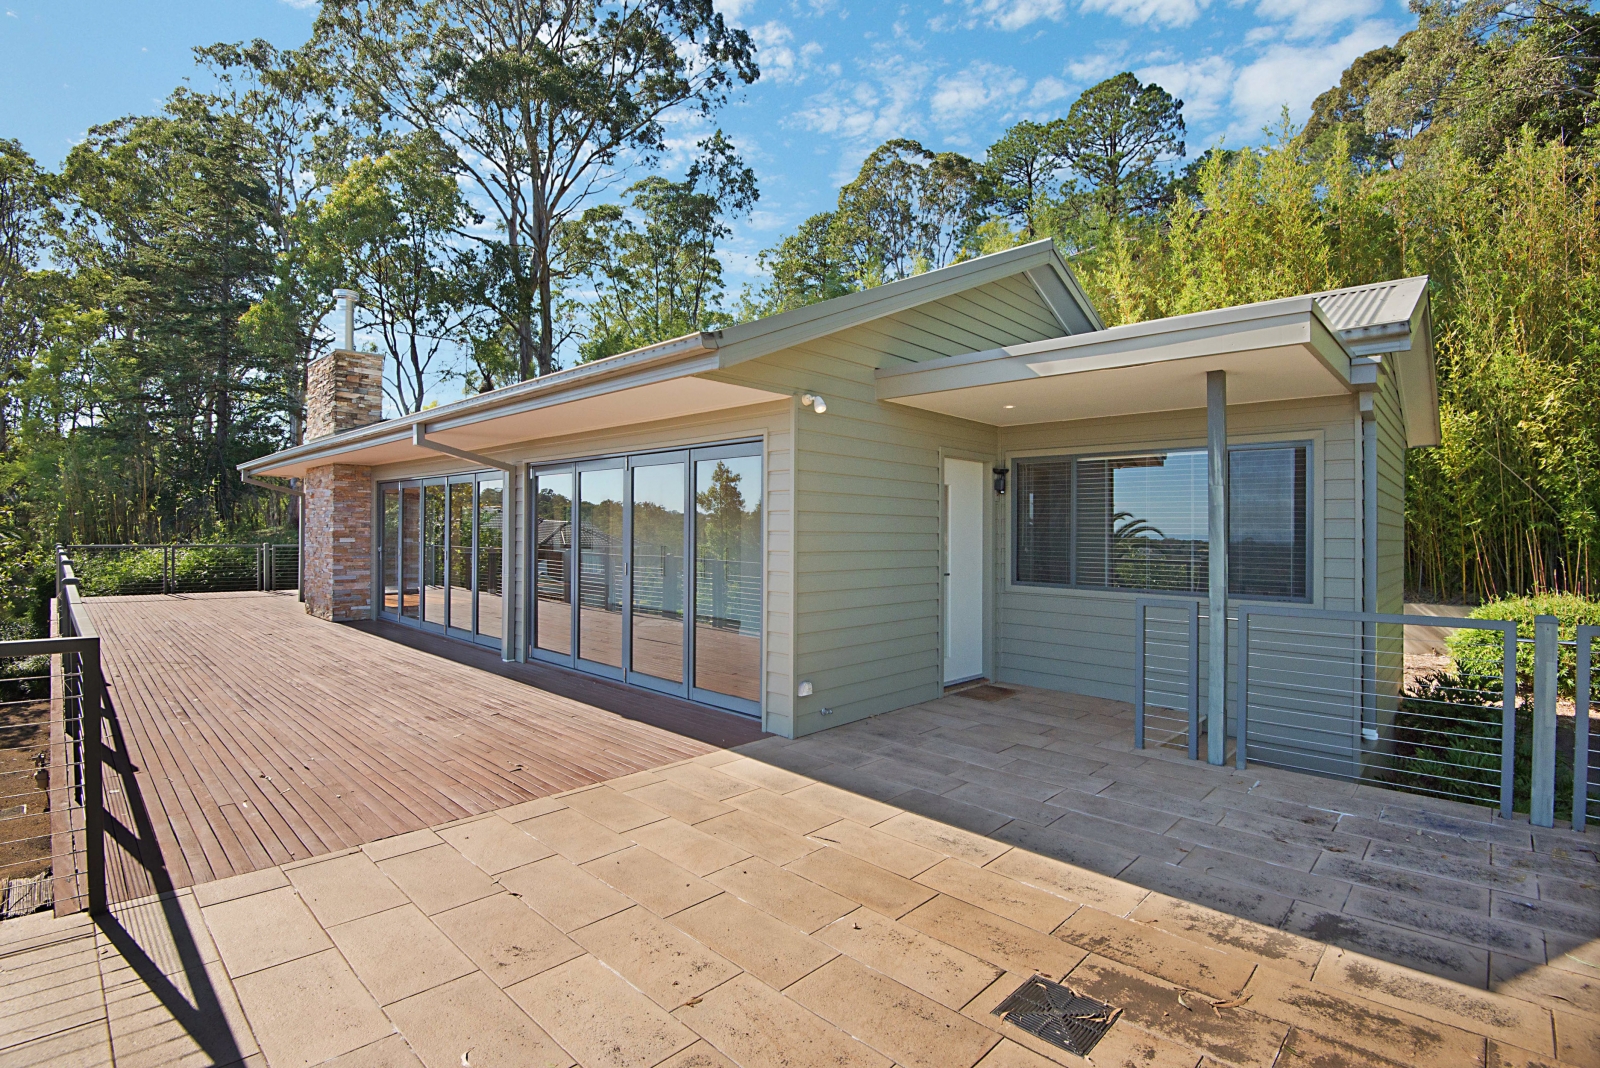 2 Rooms, House, For Rent, Old Castle Hill Road, 2 Bathrooms, Listing ID 1659, Castle Hill, NSW, Australia, 2154,